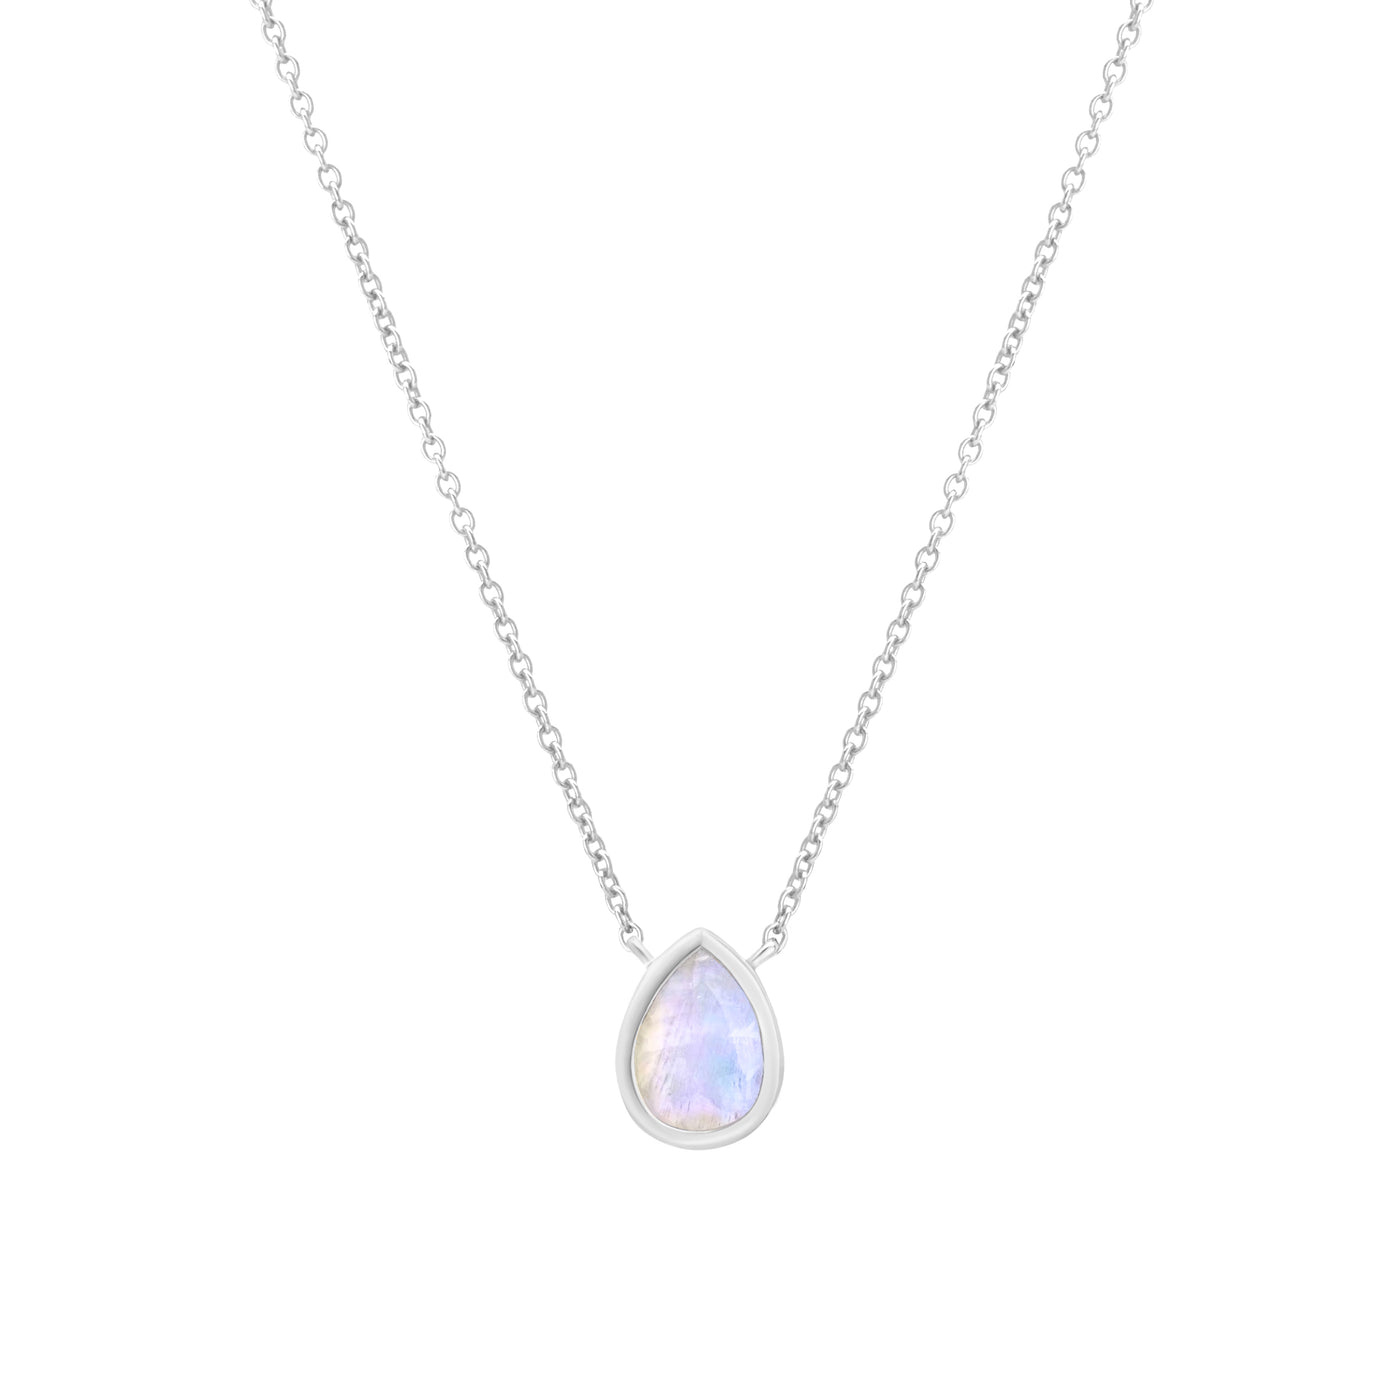 14 Karat White Gold Necklace with Pear Shaped Moonstone Against White Background